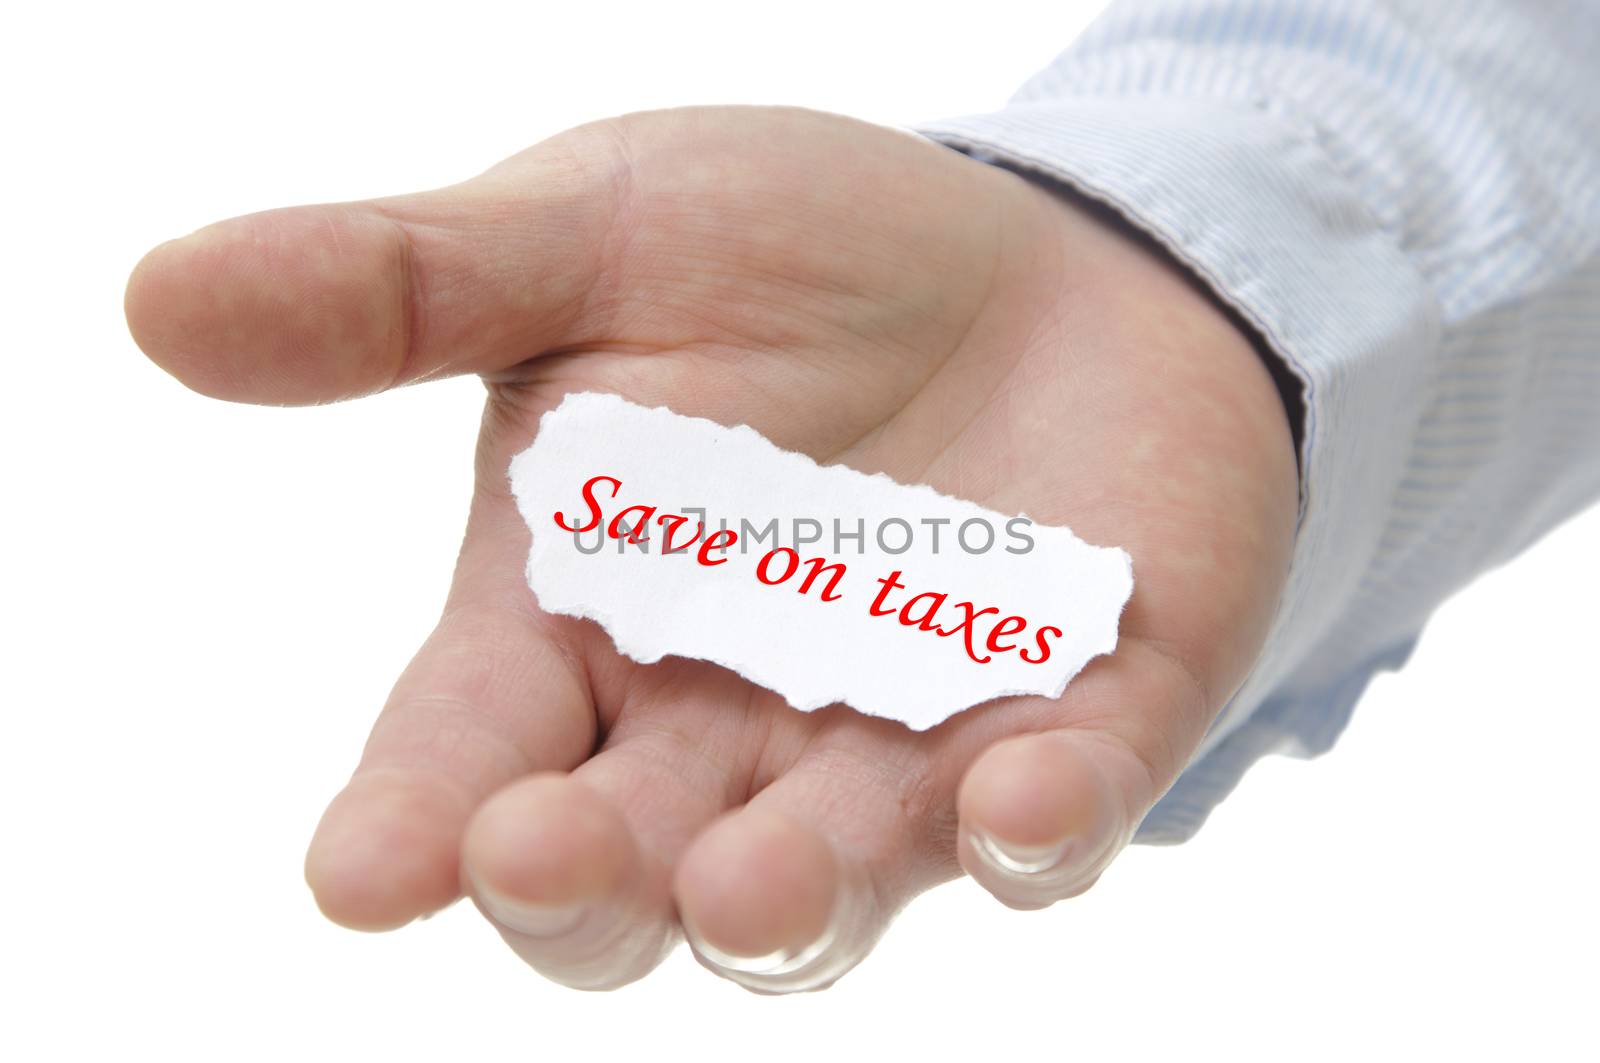 Save on taxes - Note Seriers by payphoto